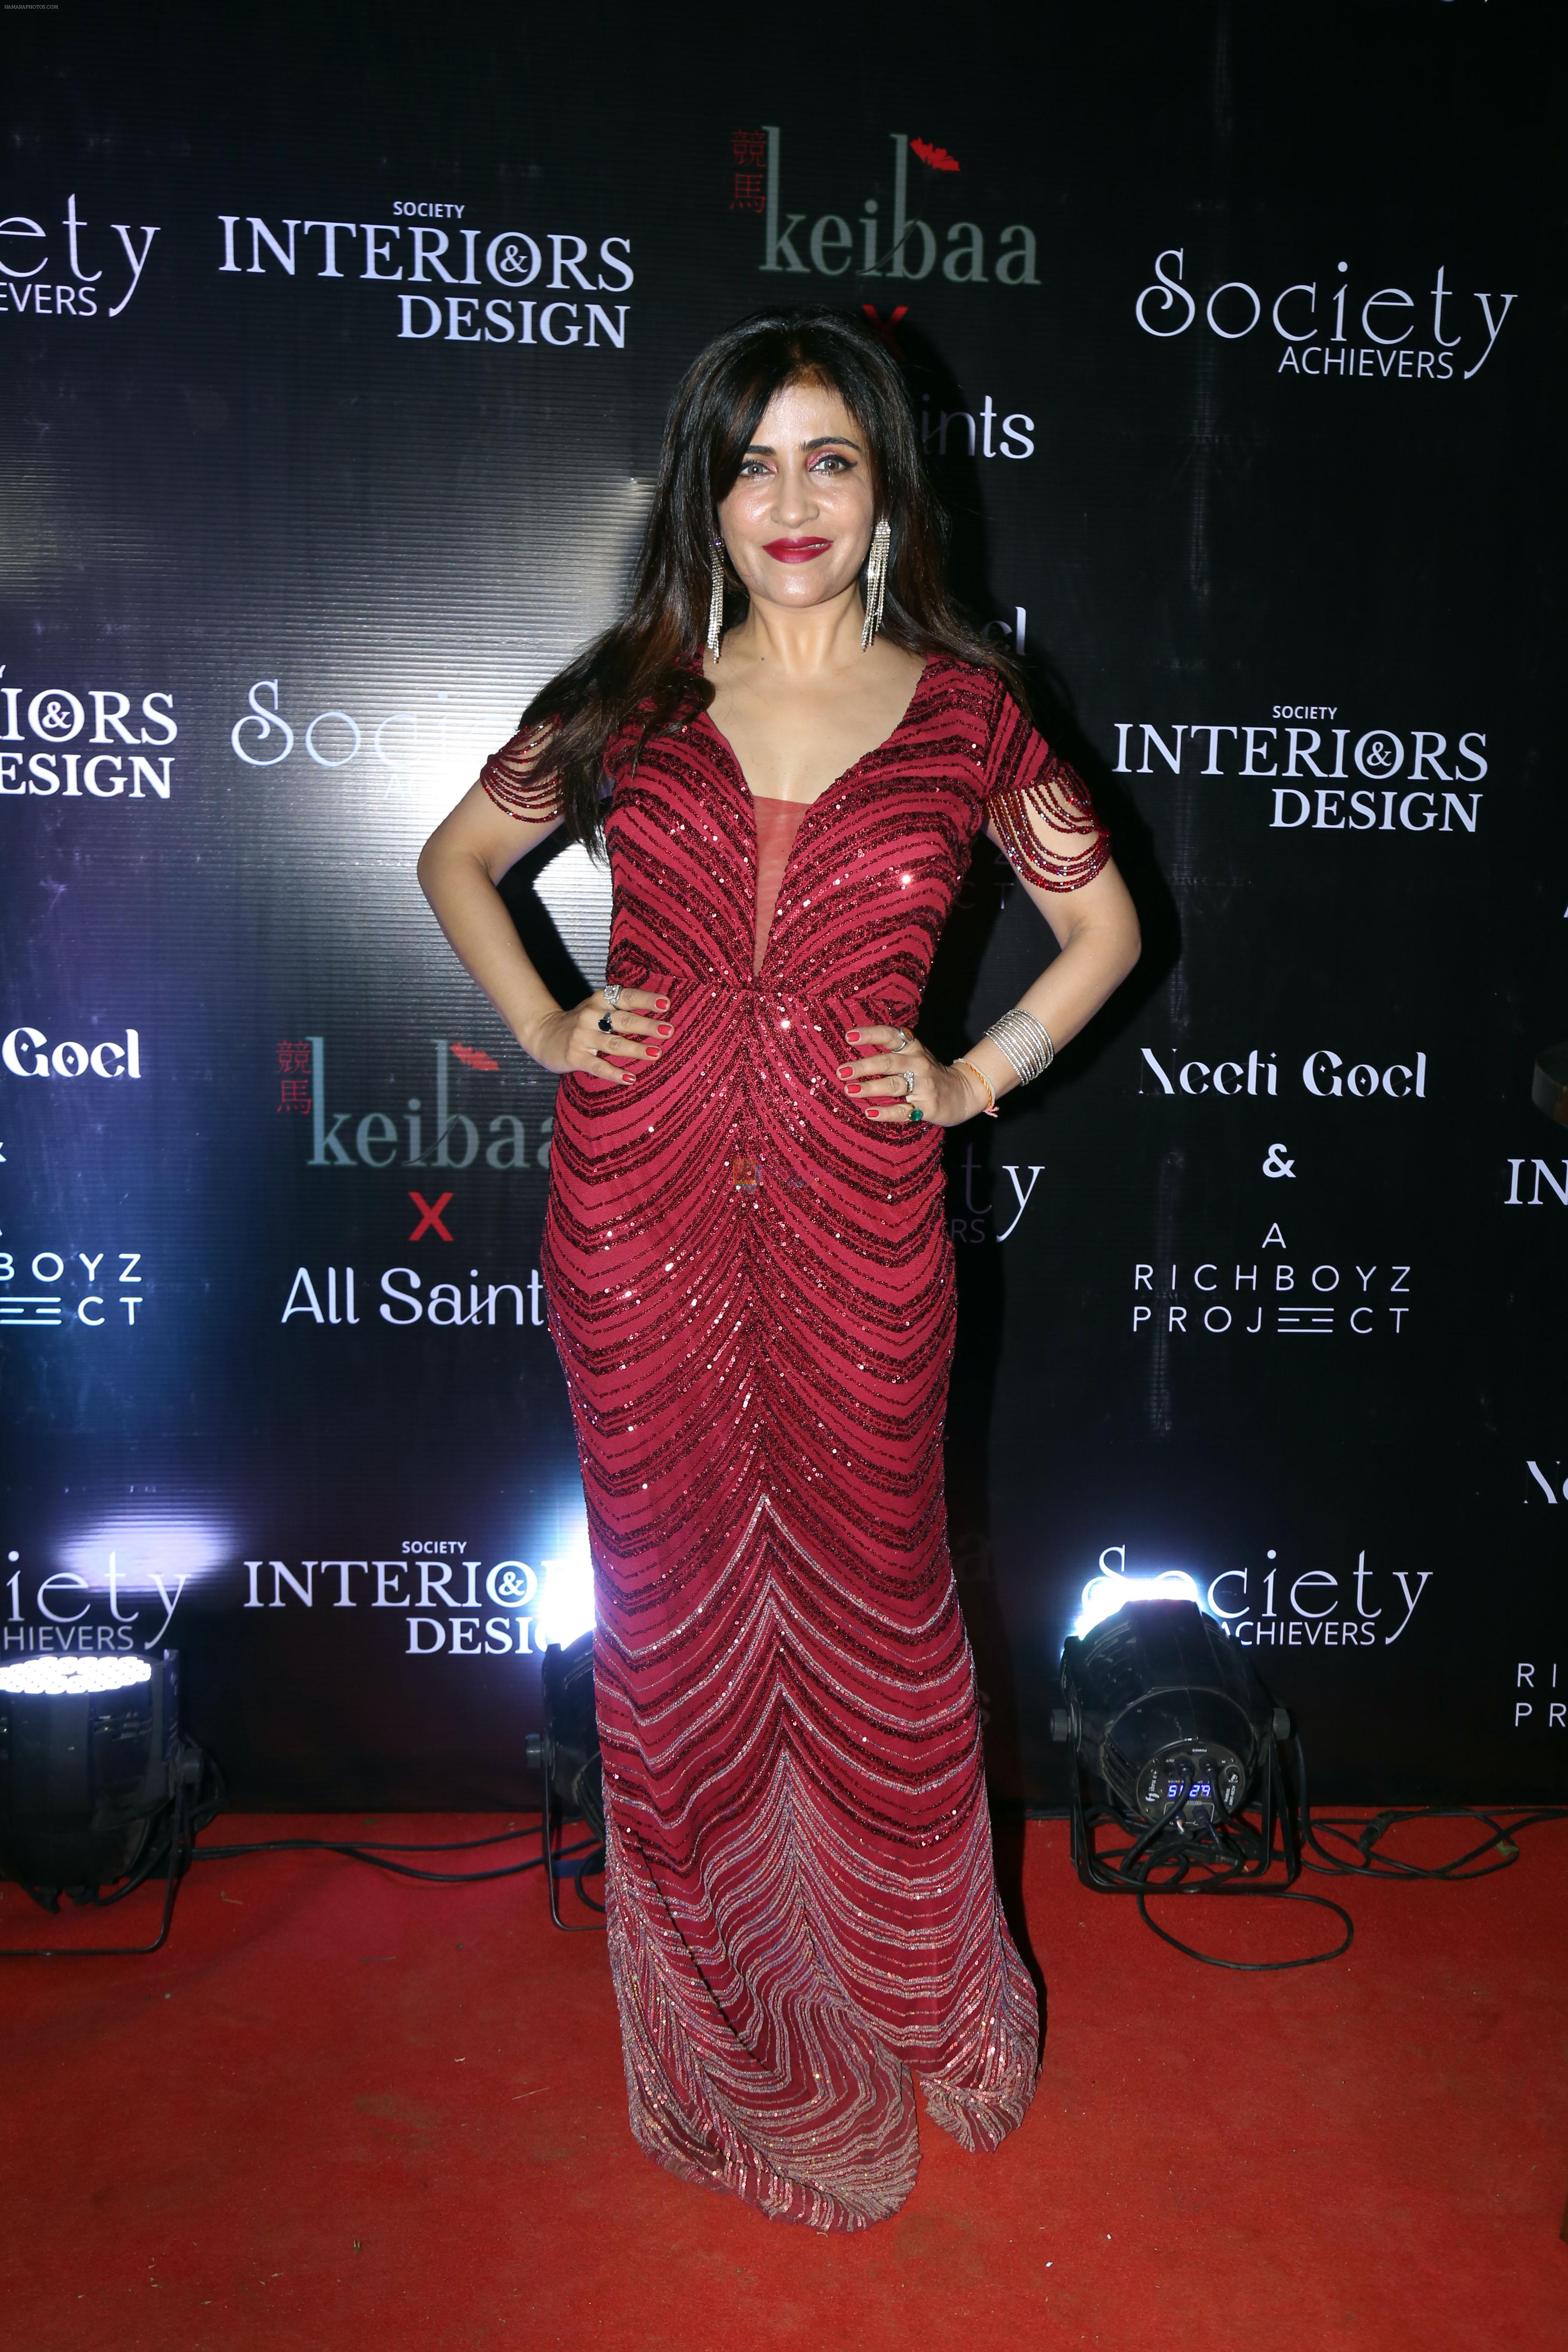 Shibani Kashyap at the ReOpening of Keibaa X All Saints and Celebration of Society Achievers and Society Interiors and Design Magazine